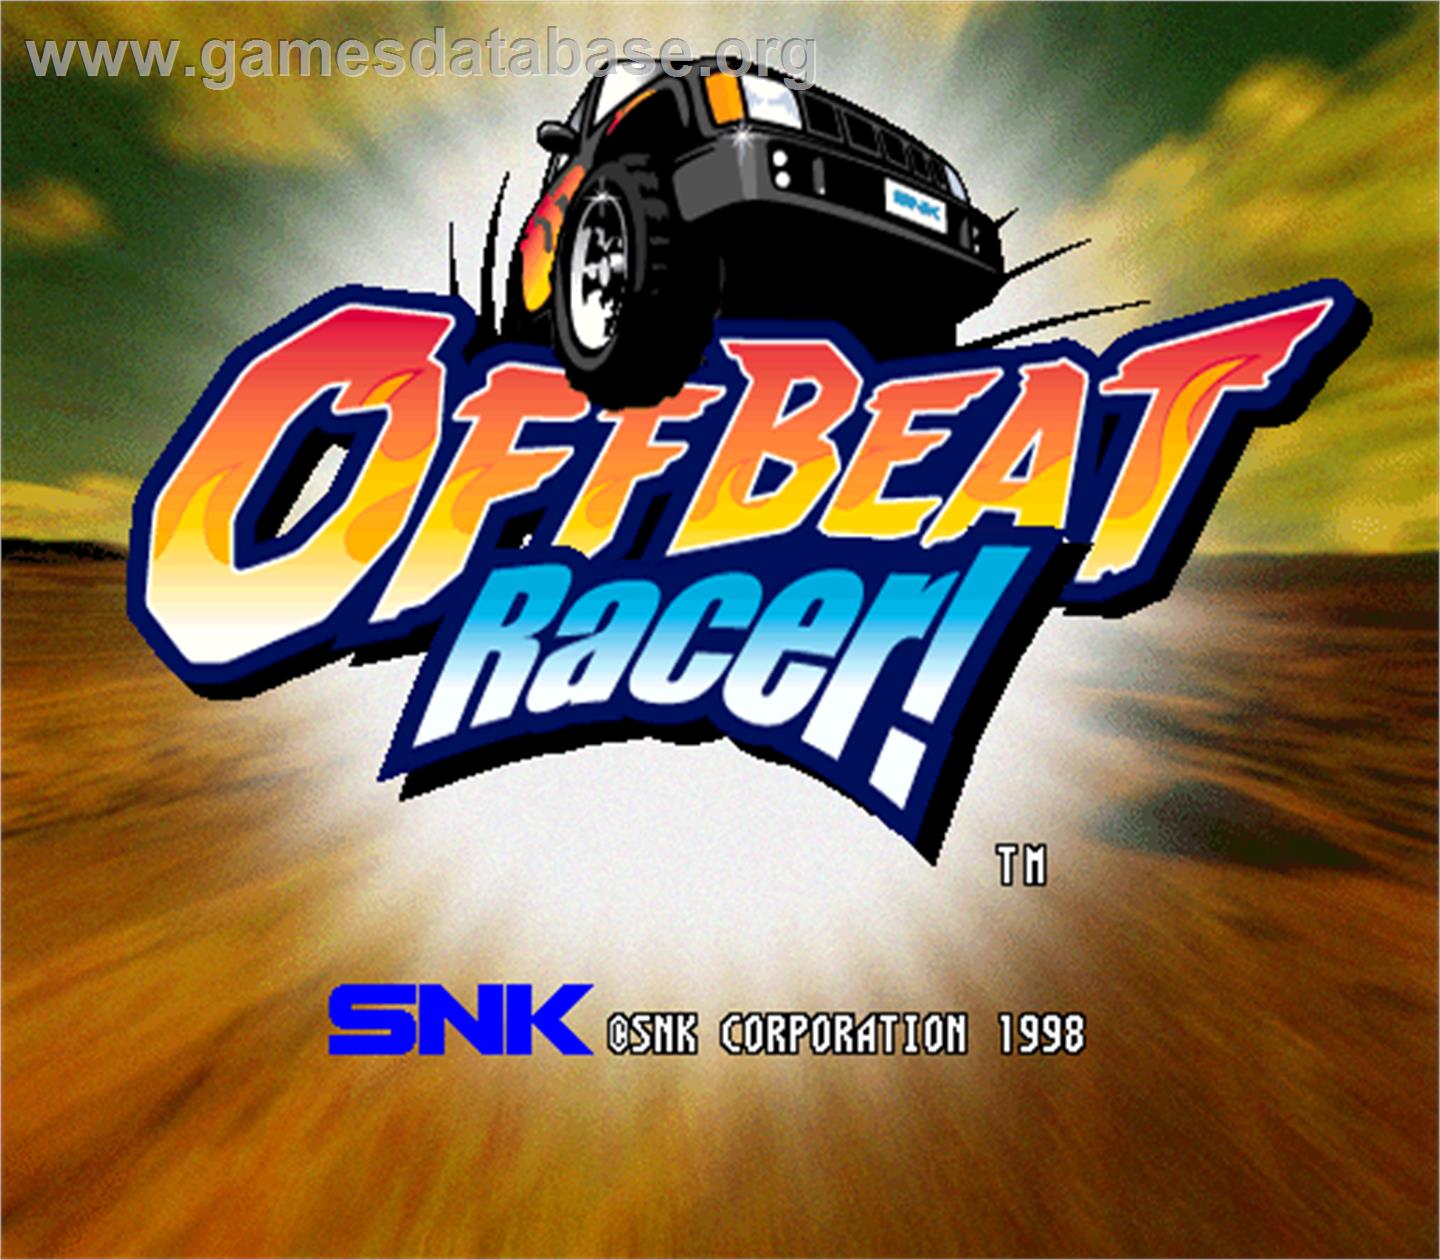 Xtreme Rally / Off Beat Racer! - Arcade - Artwork - Title Screen